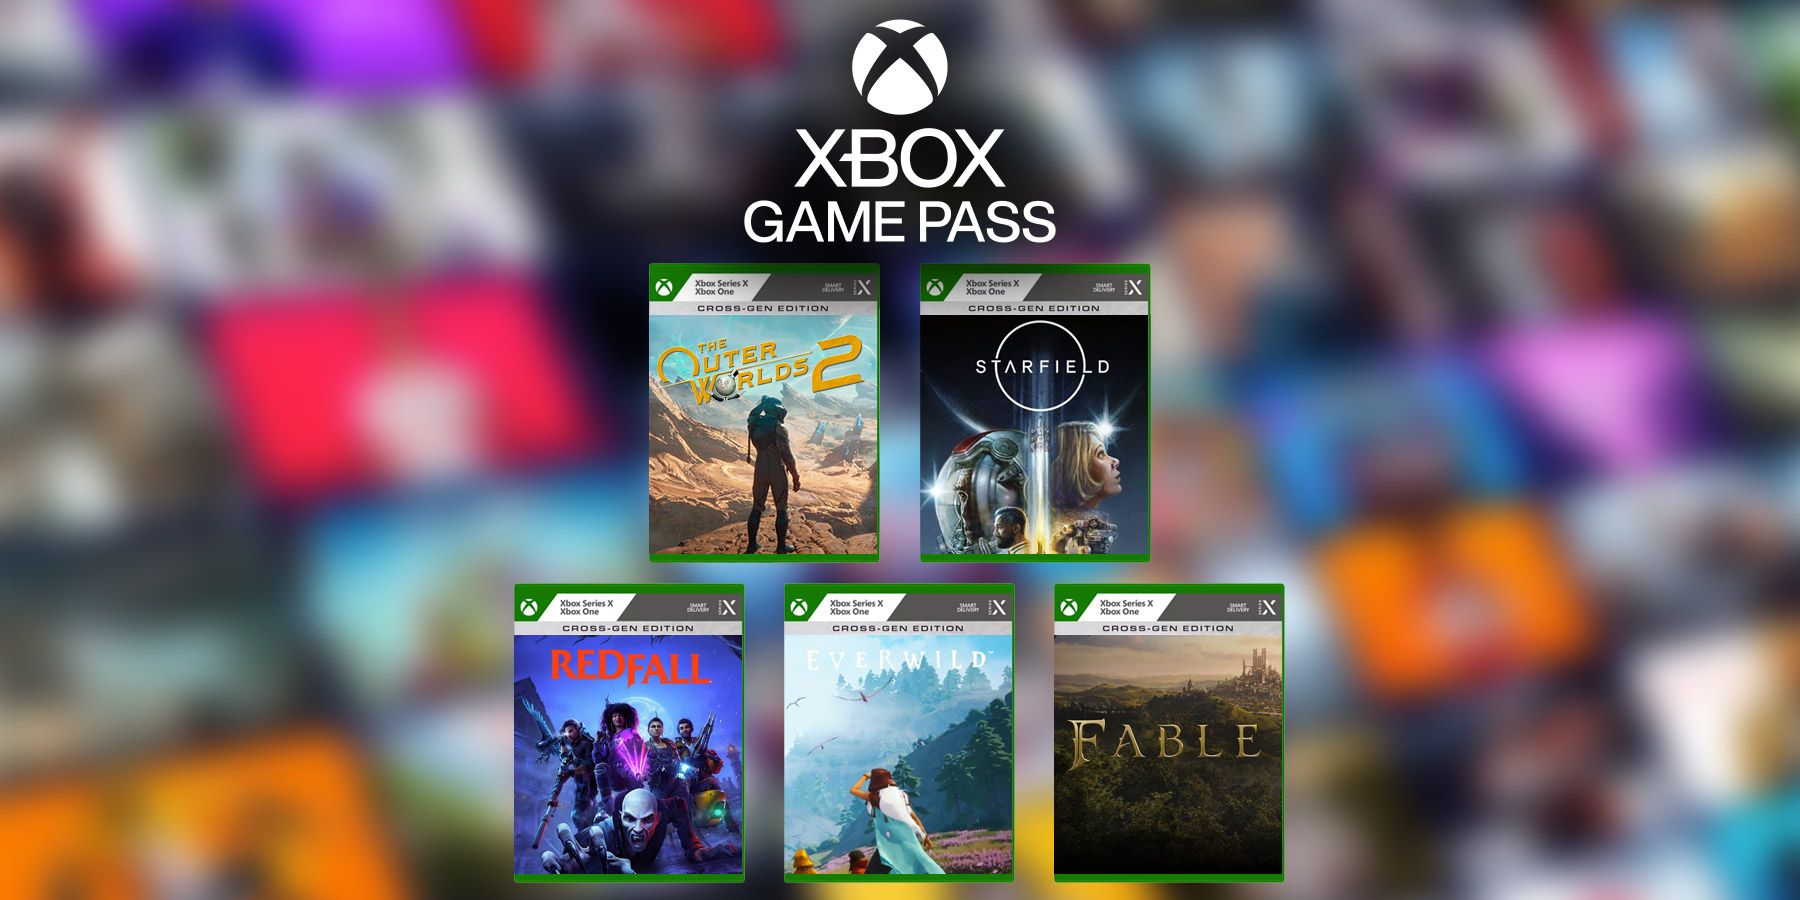 Microsoft increases Xbox Game Pass prices